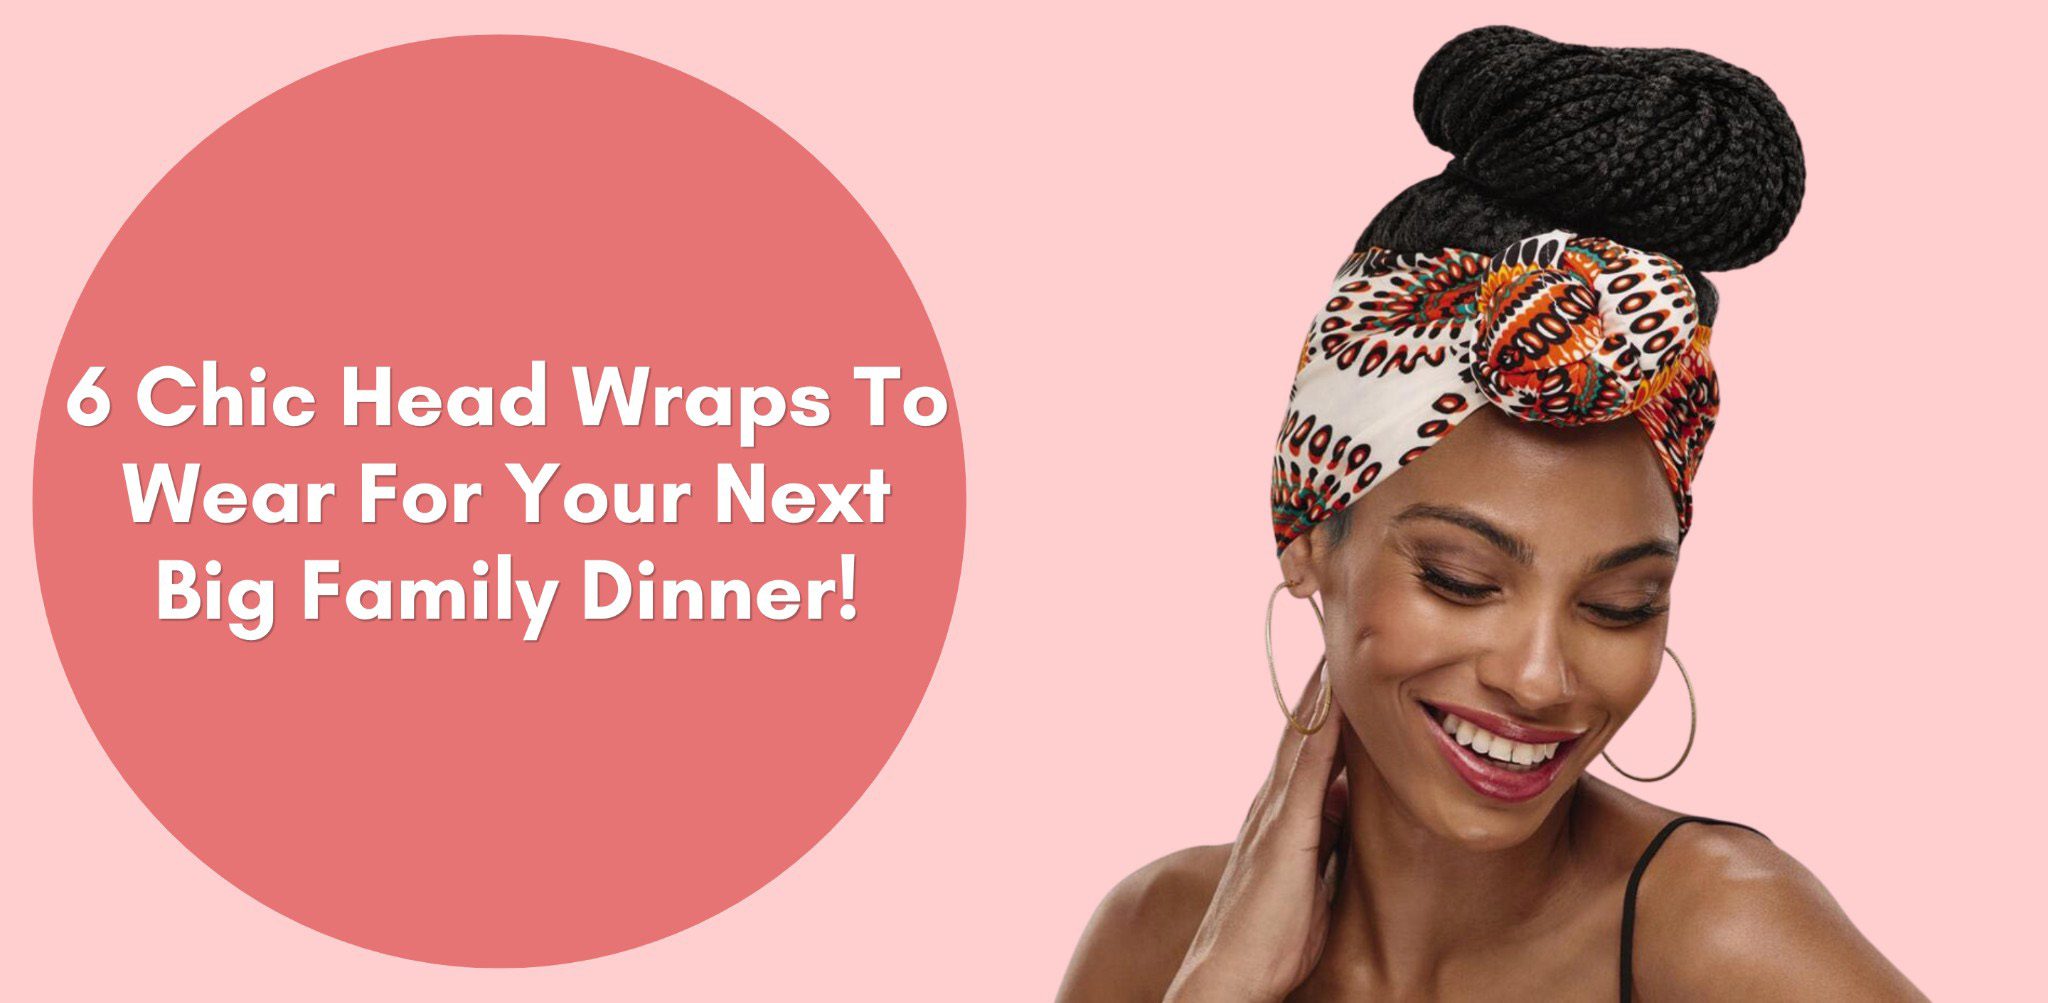 6 Chic Head Wraps To Wear For Your Next Big Family Dinner!